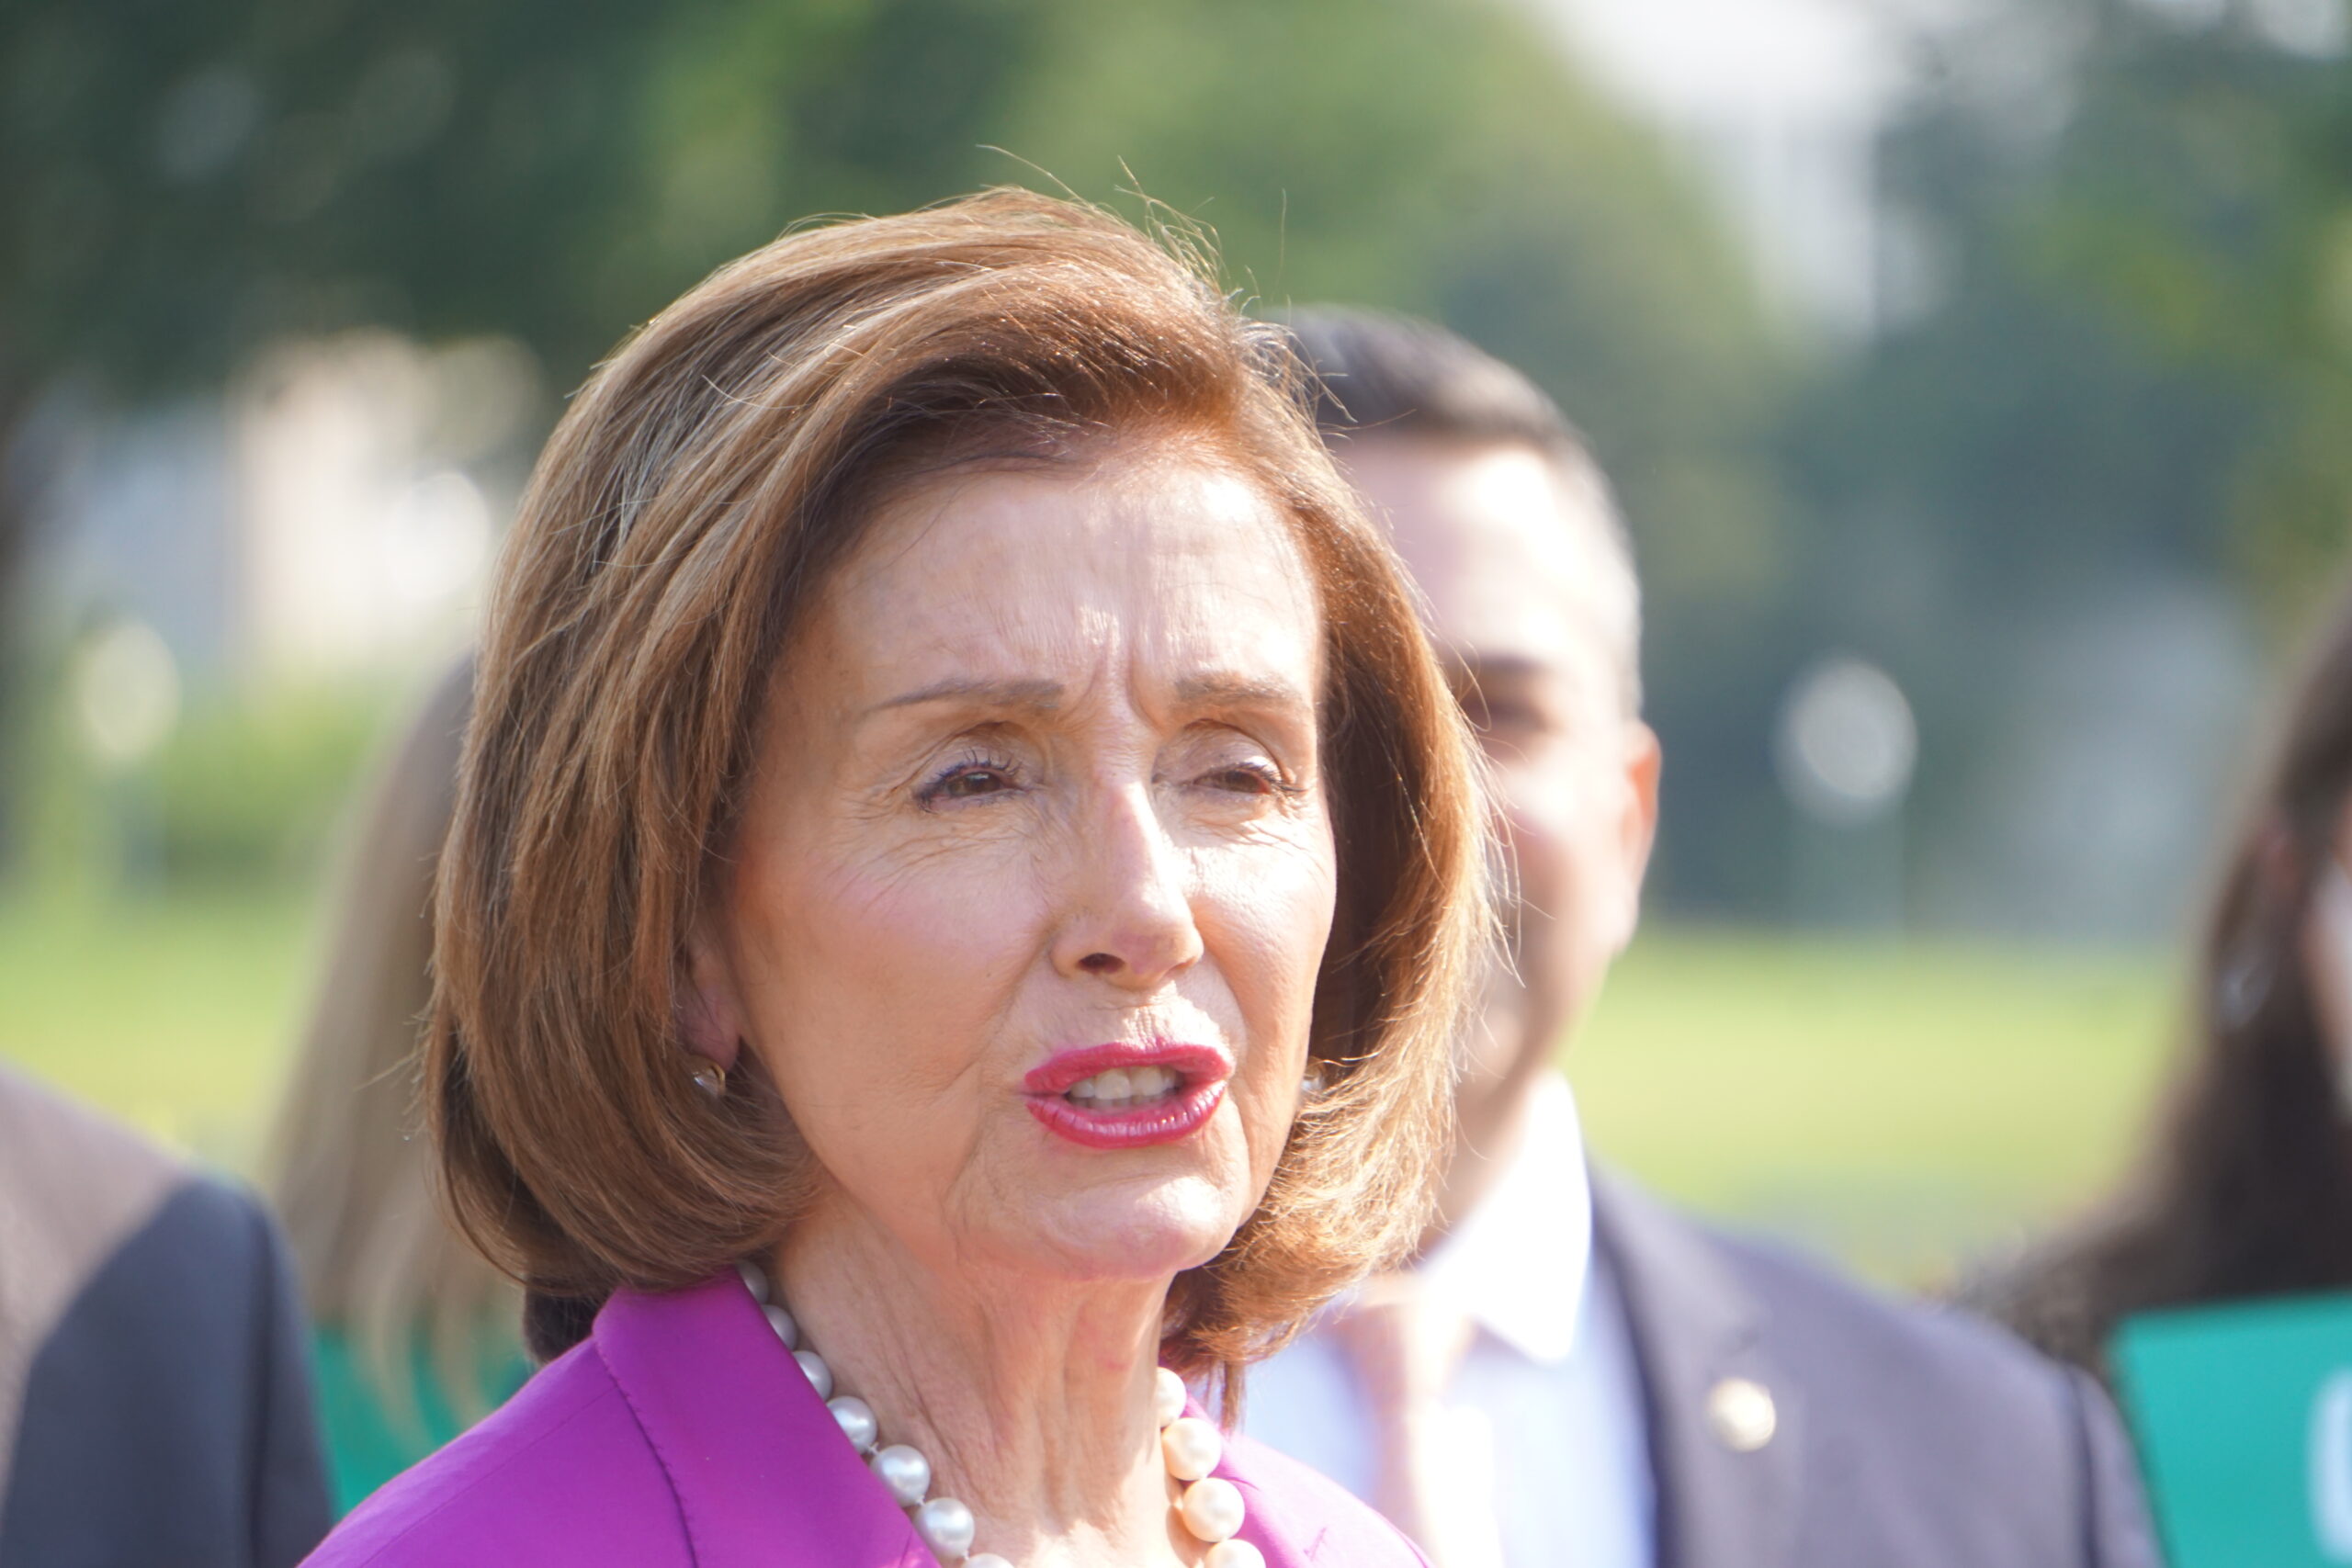 Nancy Pelosi Snaps at Reporter: 'Let's not Waste your Time or Mine' [Video]